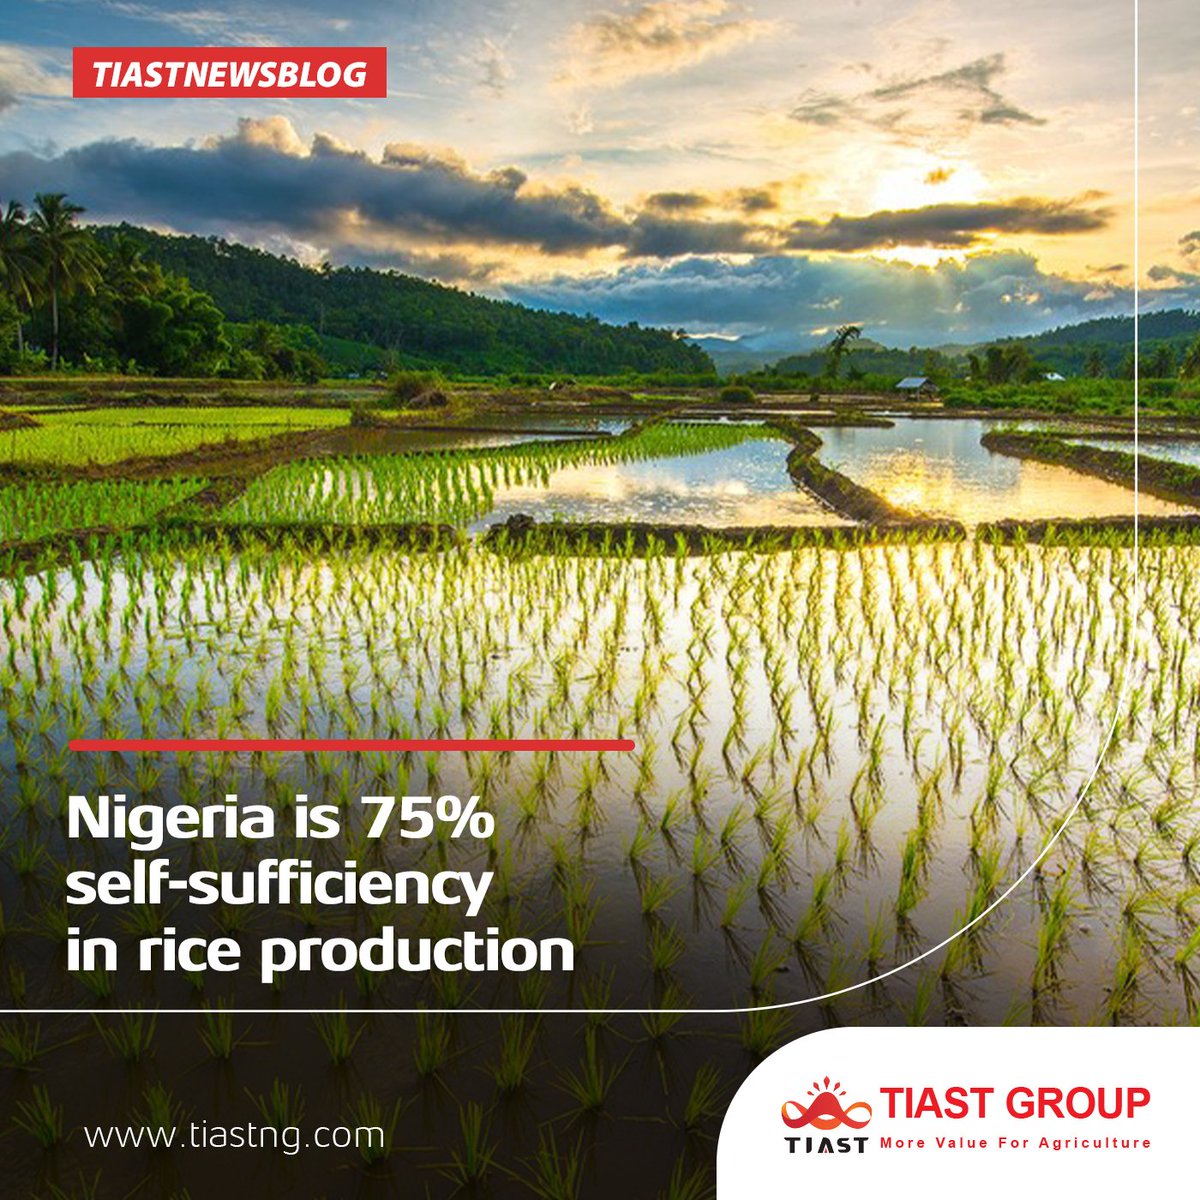 Nigeria Is 75% Self-sufficient In Rice Production

visit our website agroriches.com

#africa #market #industry #solution #agriculture
#agroriches #ghana #trade #world. #africa 
#china #projects #rice #nigeria #selfsufficiency #selfsufficient